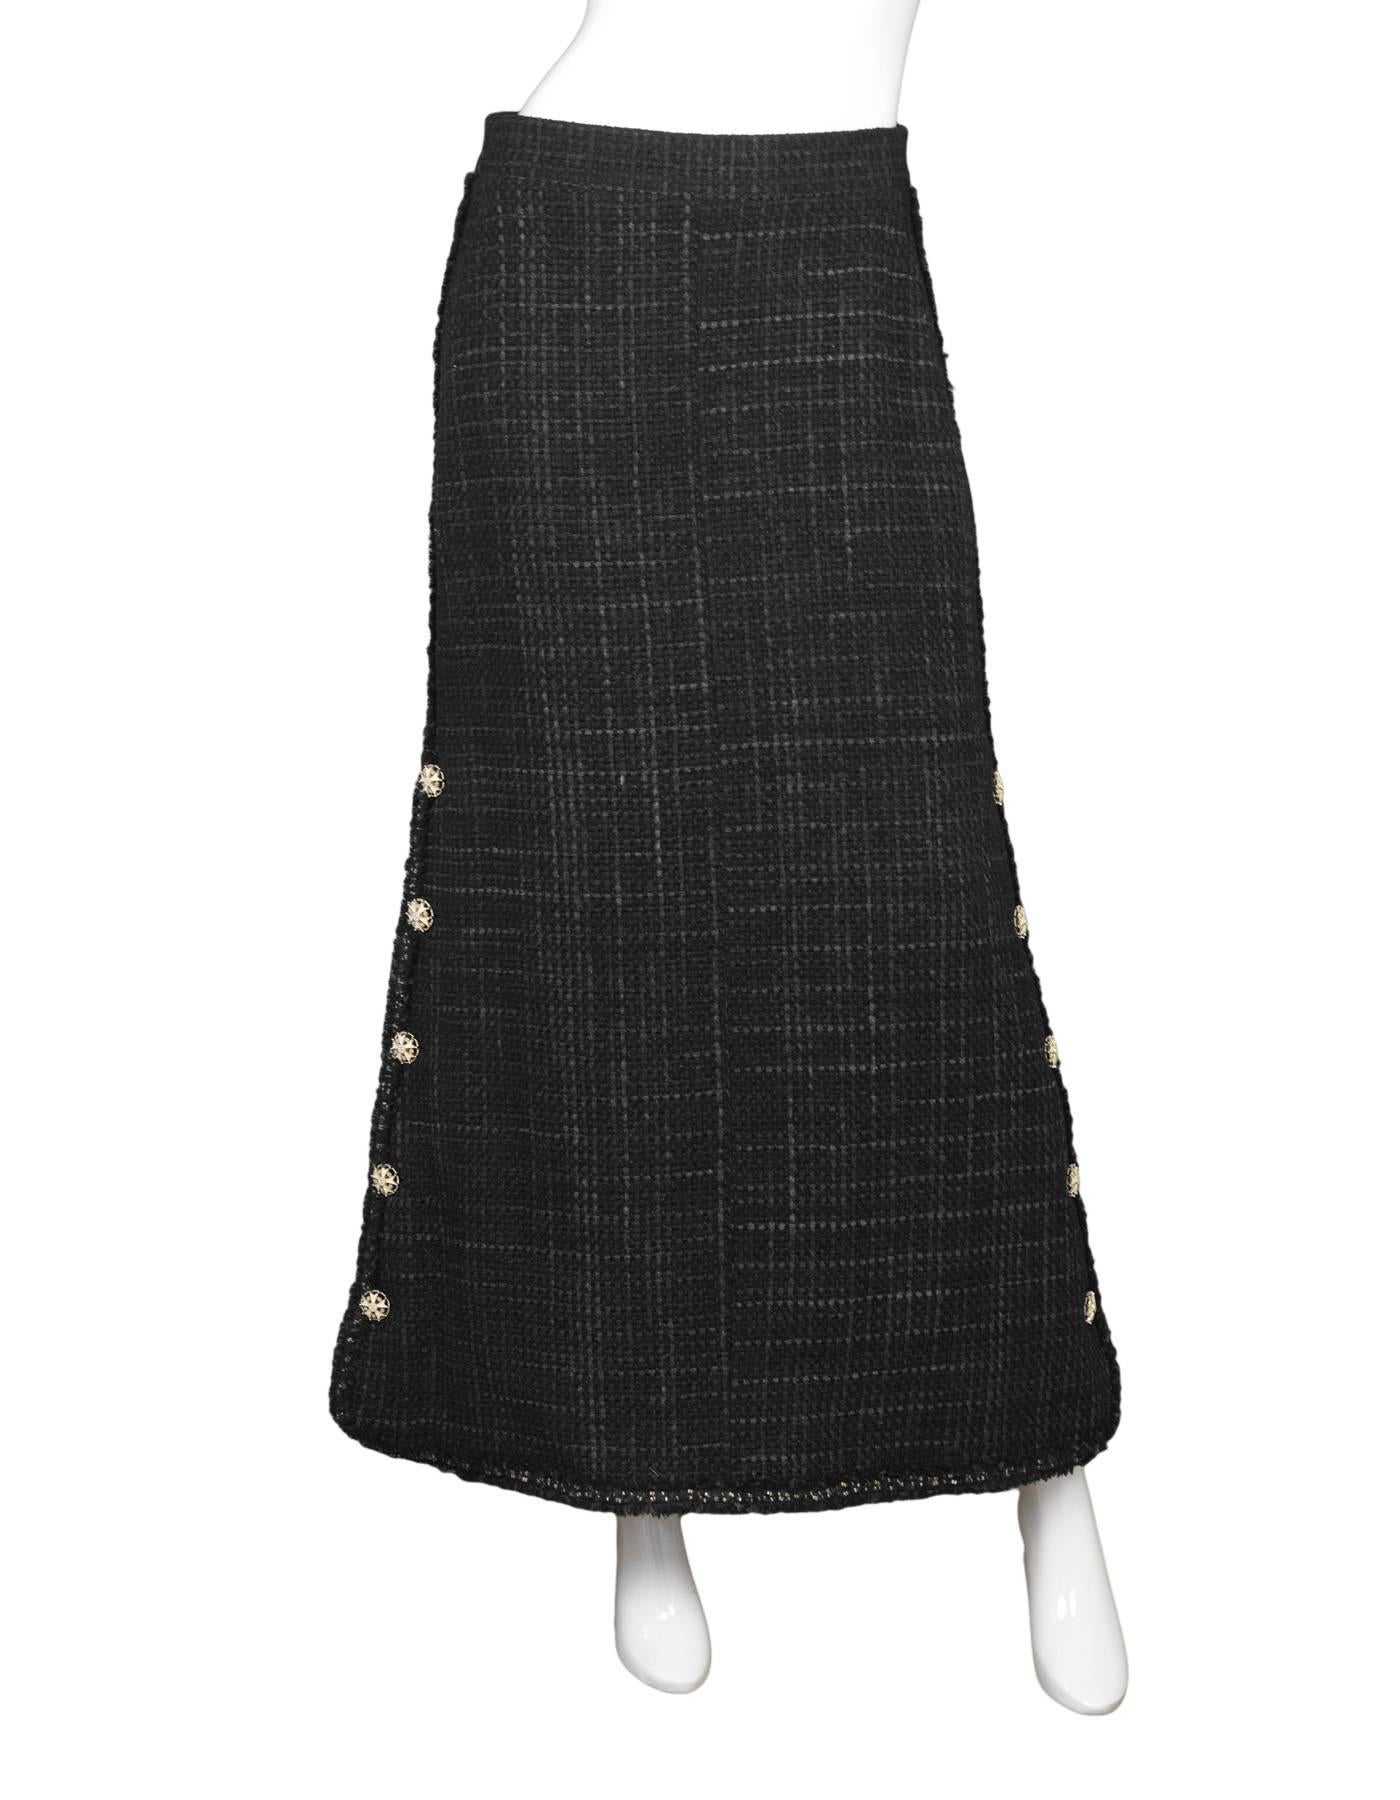 Chanel NEW Blue & Navy Tweed Maxi Skirt
Features decorative star buttons along sides

Made In: France
Year of Production: 2008
Color: Black and navy
Composition: 45% wool, 30% nylon, 25% polyester
Lining: Black, 100% silk
Closure/Opening: Back